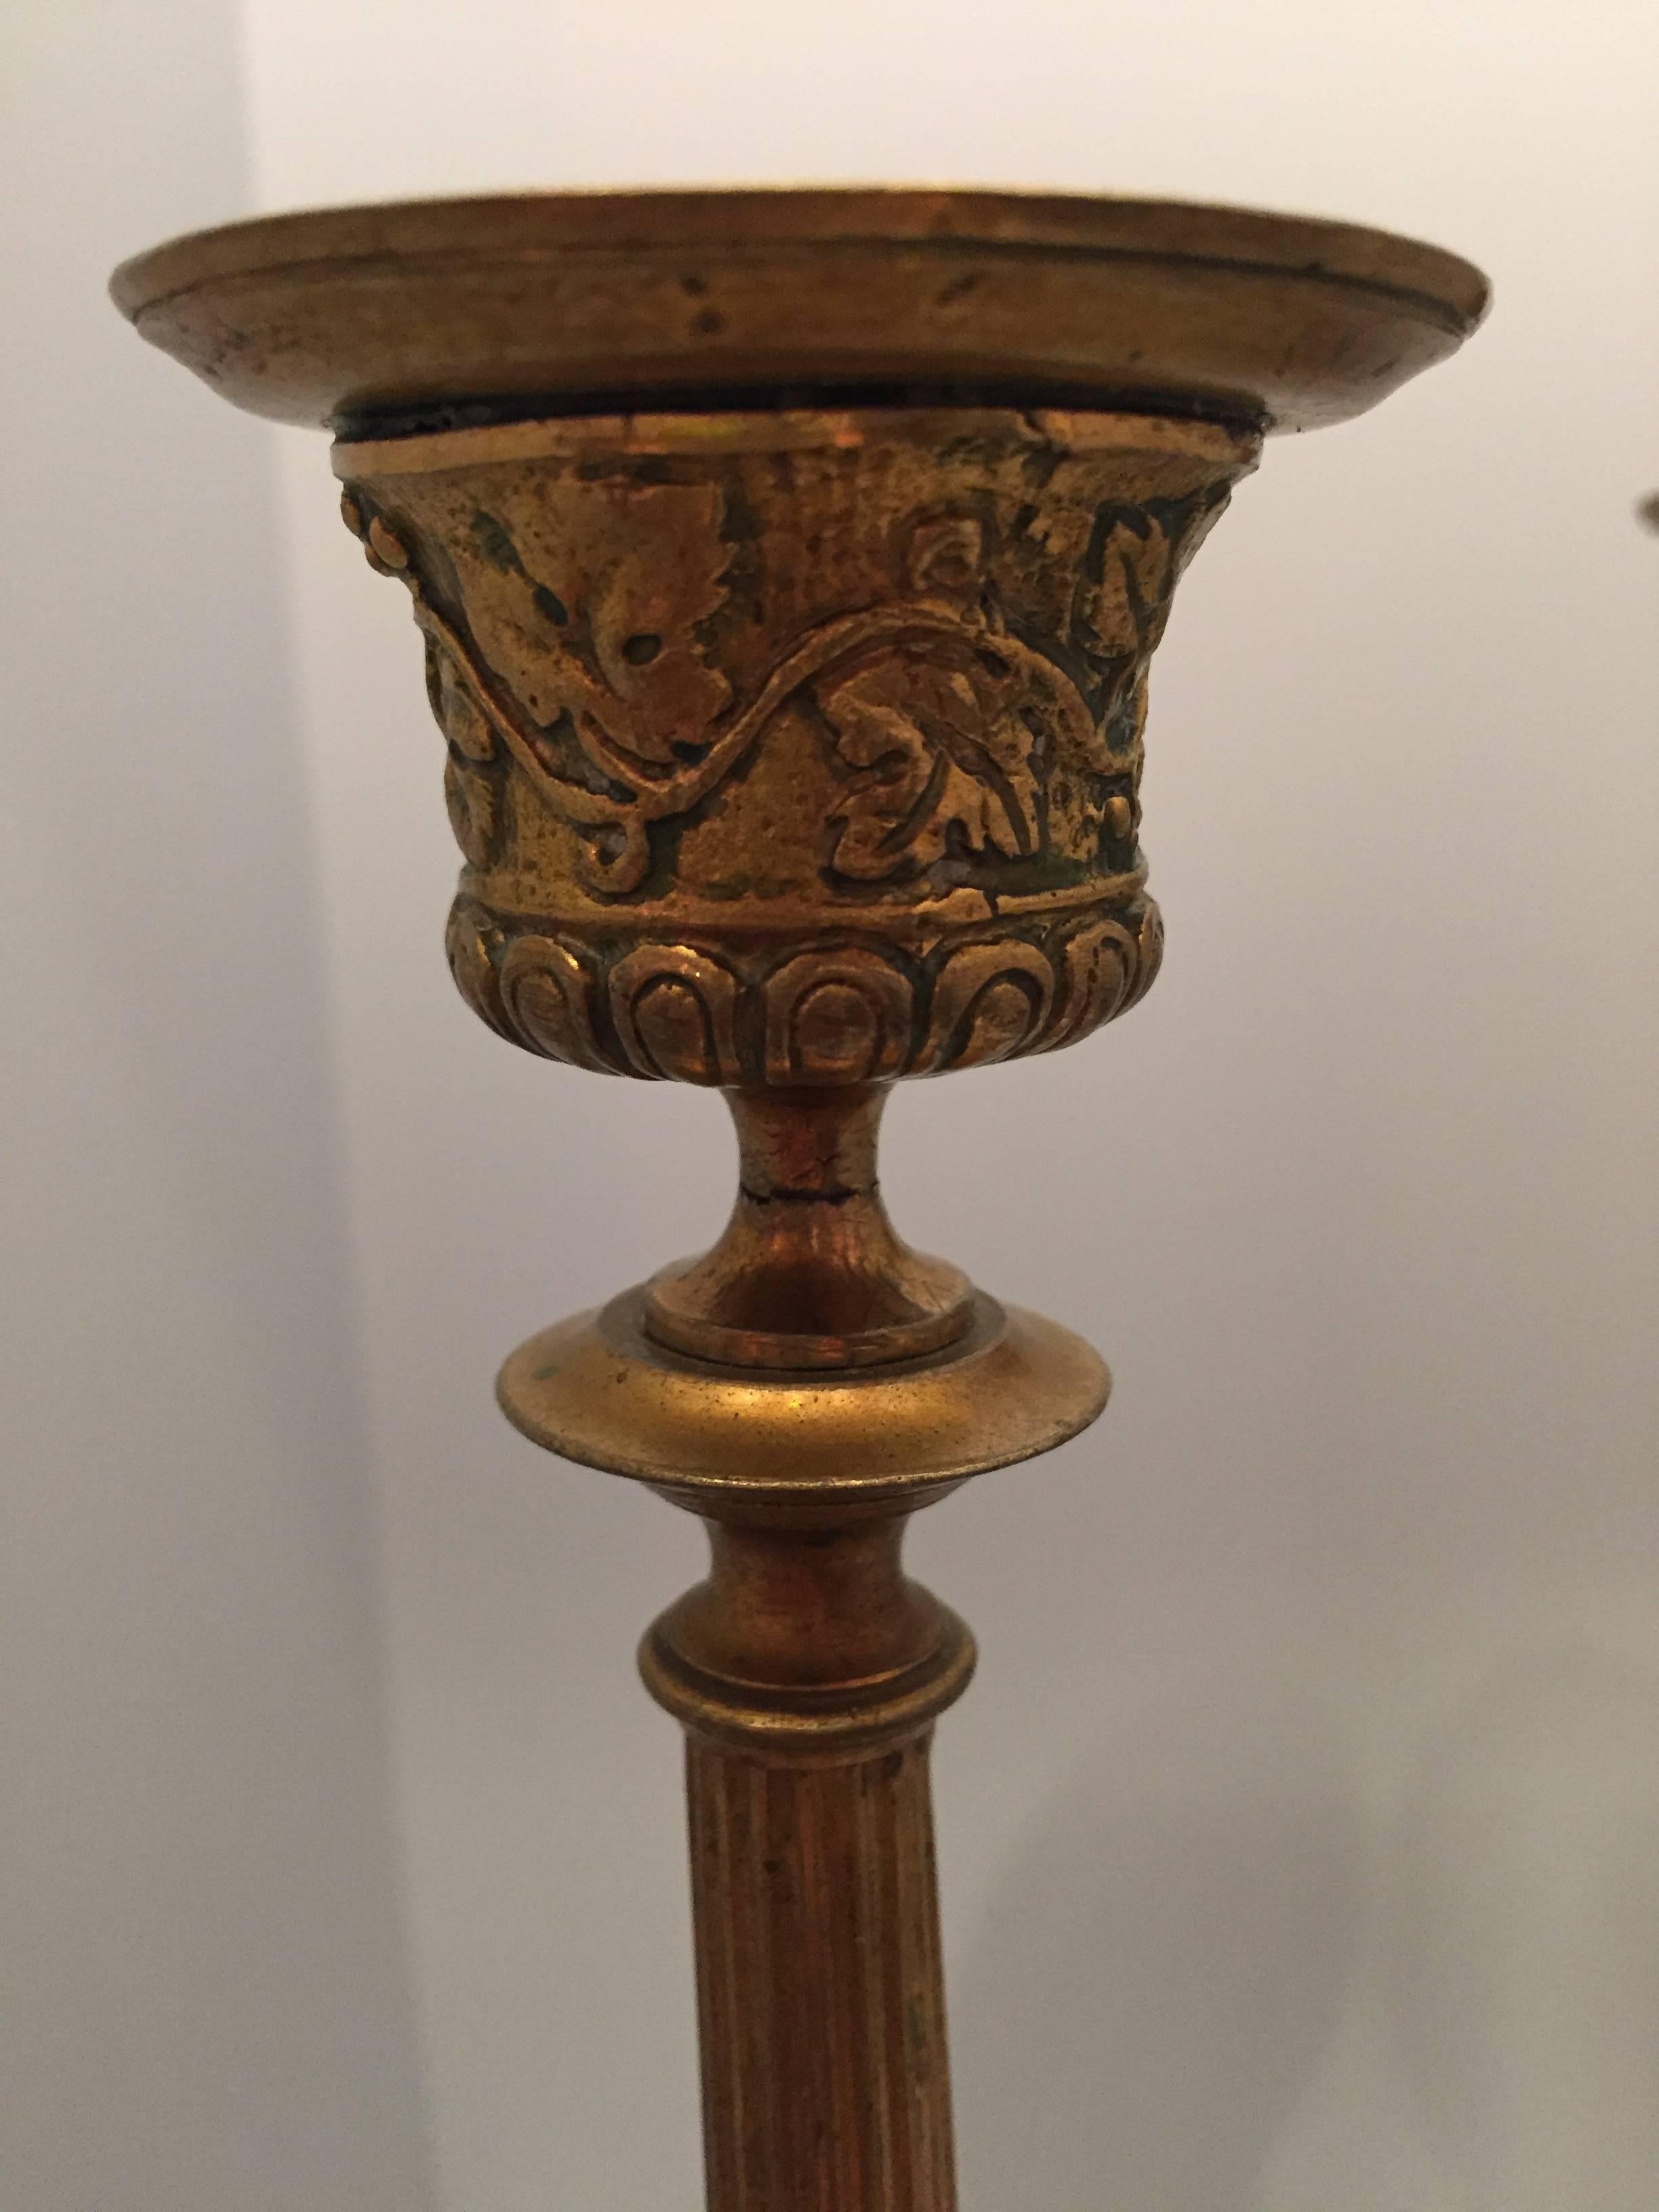 Beautiful pair of bronze Victor Paillard style French 19th century candlesticks each with a snake climbing down a reeded stem supported by a tripod base consisting of lion paws and acanthus leaves. The upper part is decorated with a bacchanalian